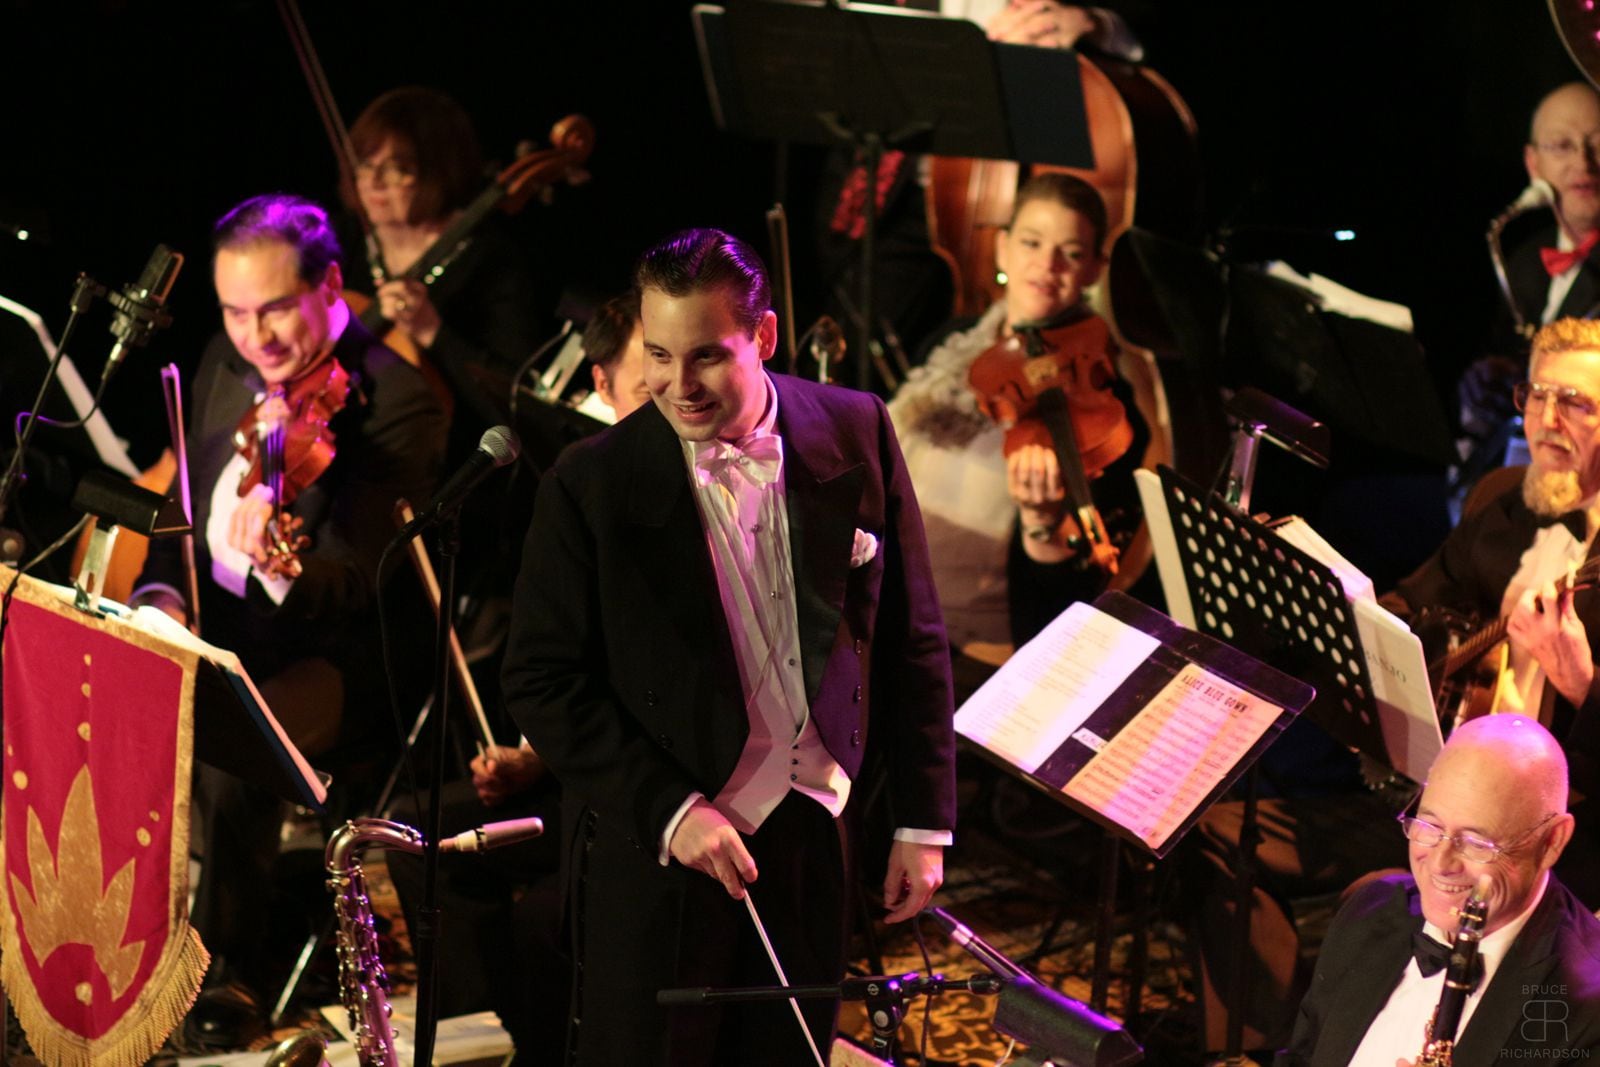 Matt Tolentino directs the Singapore Slingers, an orchestra playing 1920s-30s tunes to fall...